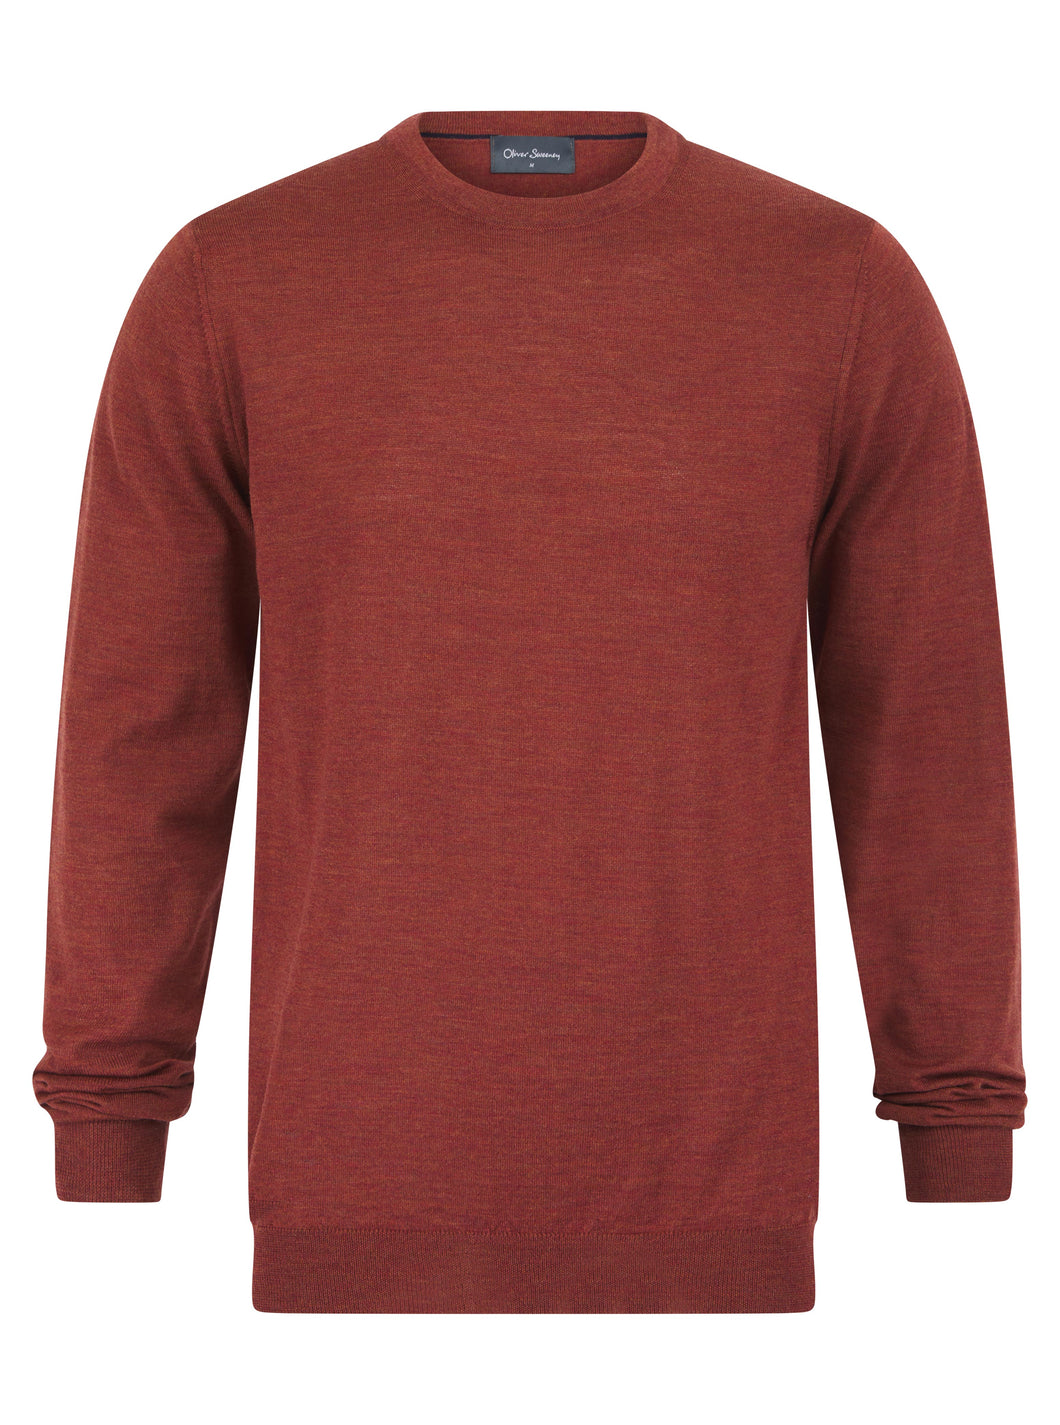 Oliver Sweeney Camber Knit Rust